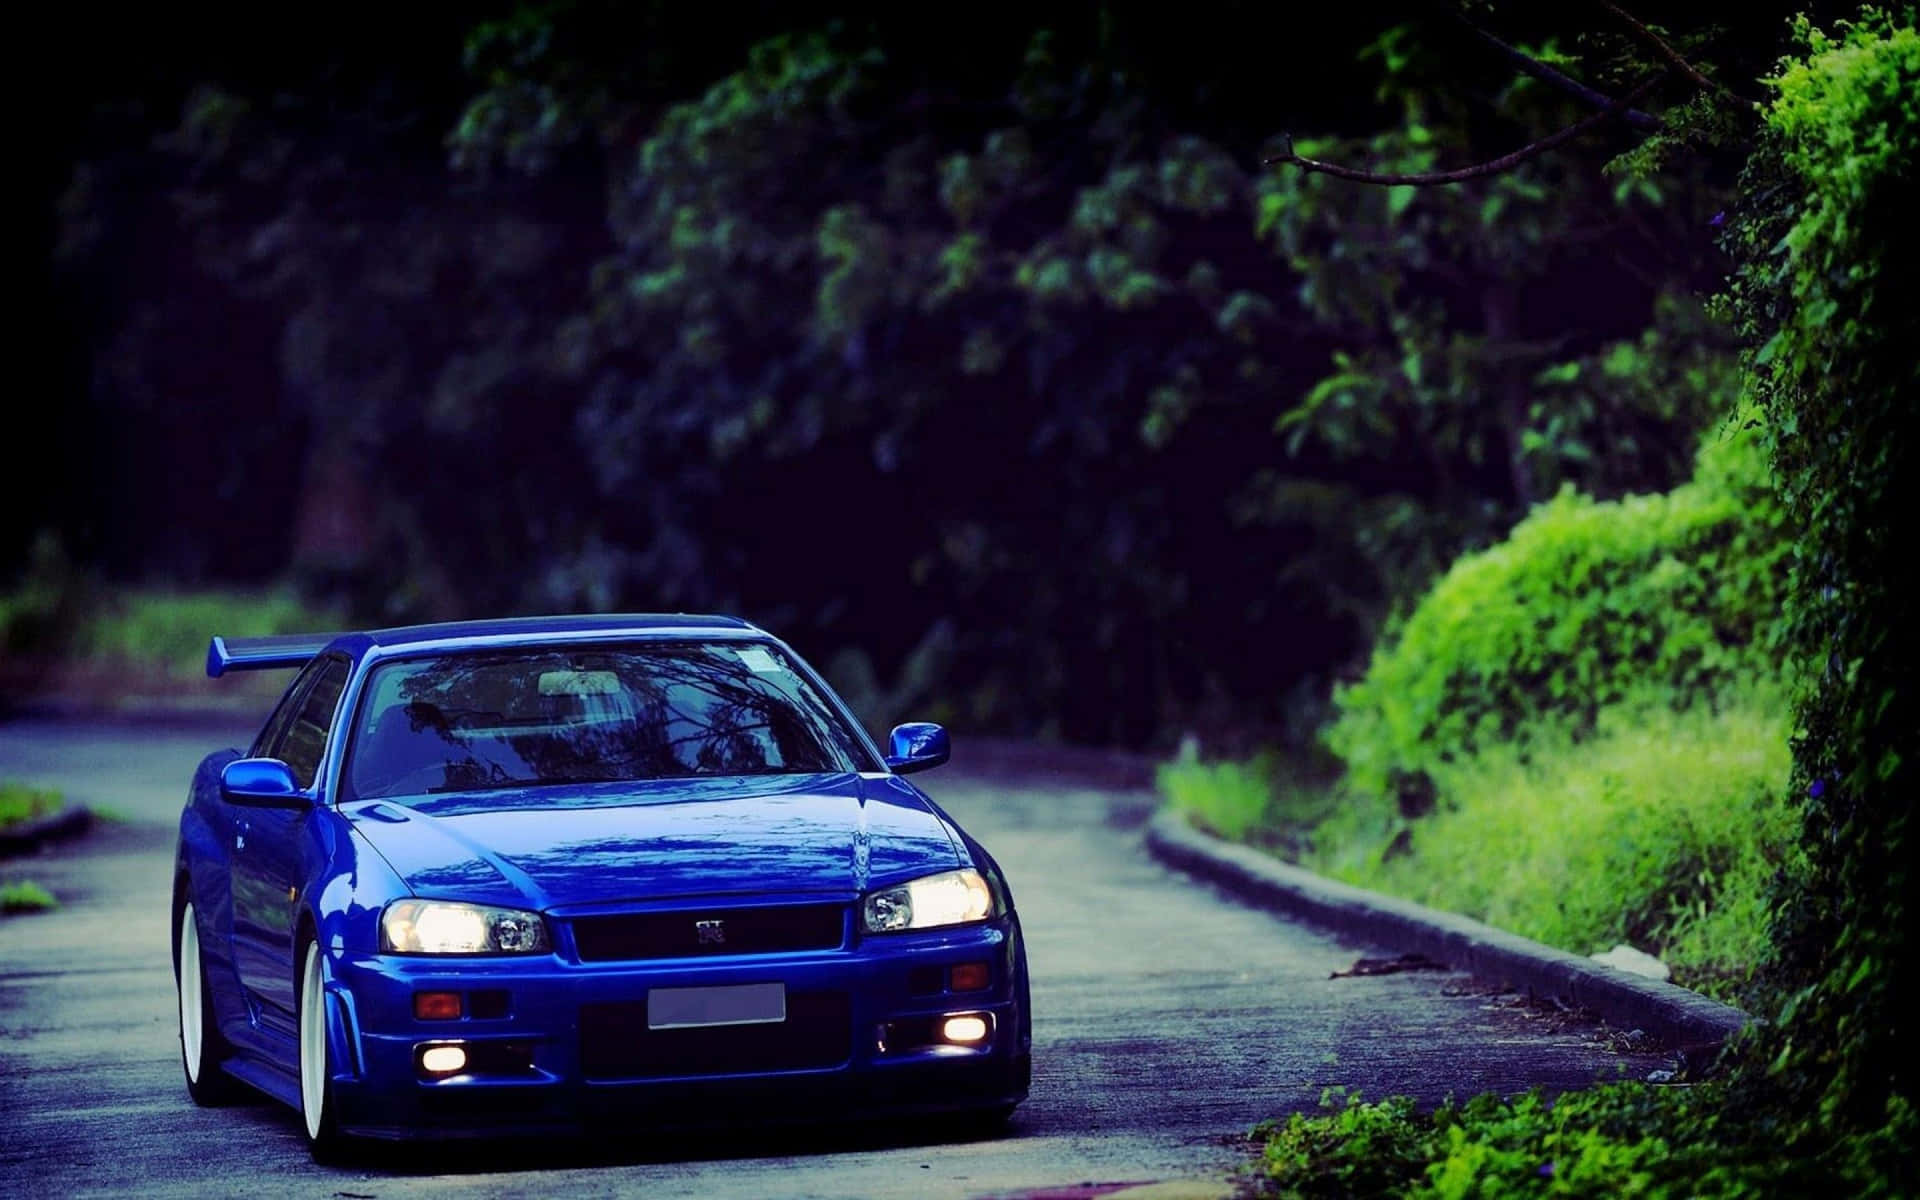 "Cool and Sporty: Nissan Skyline" Wallpaper